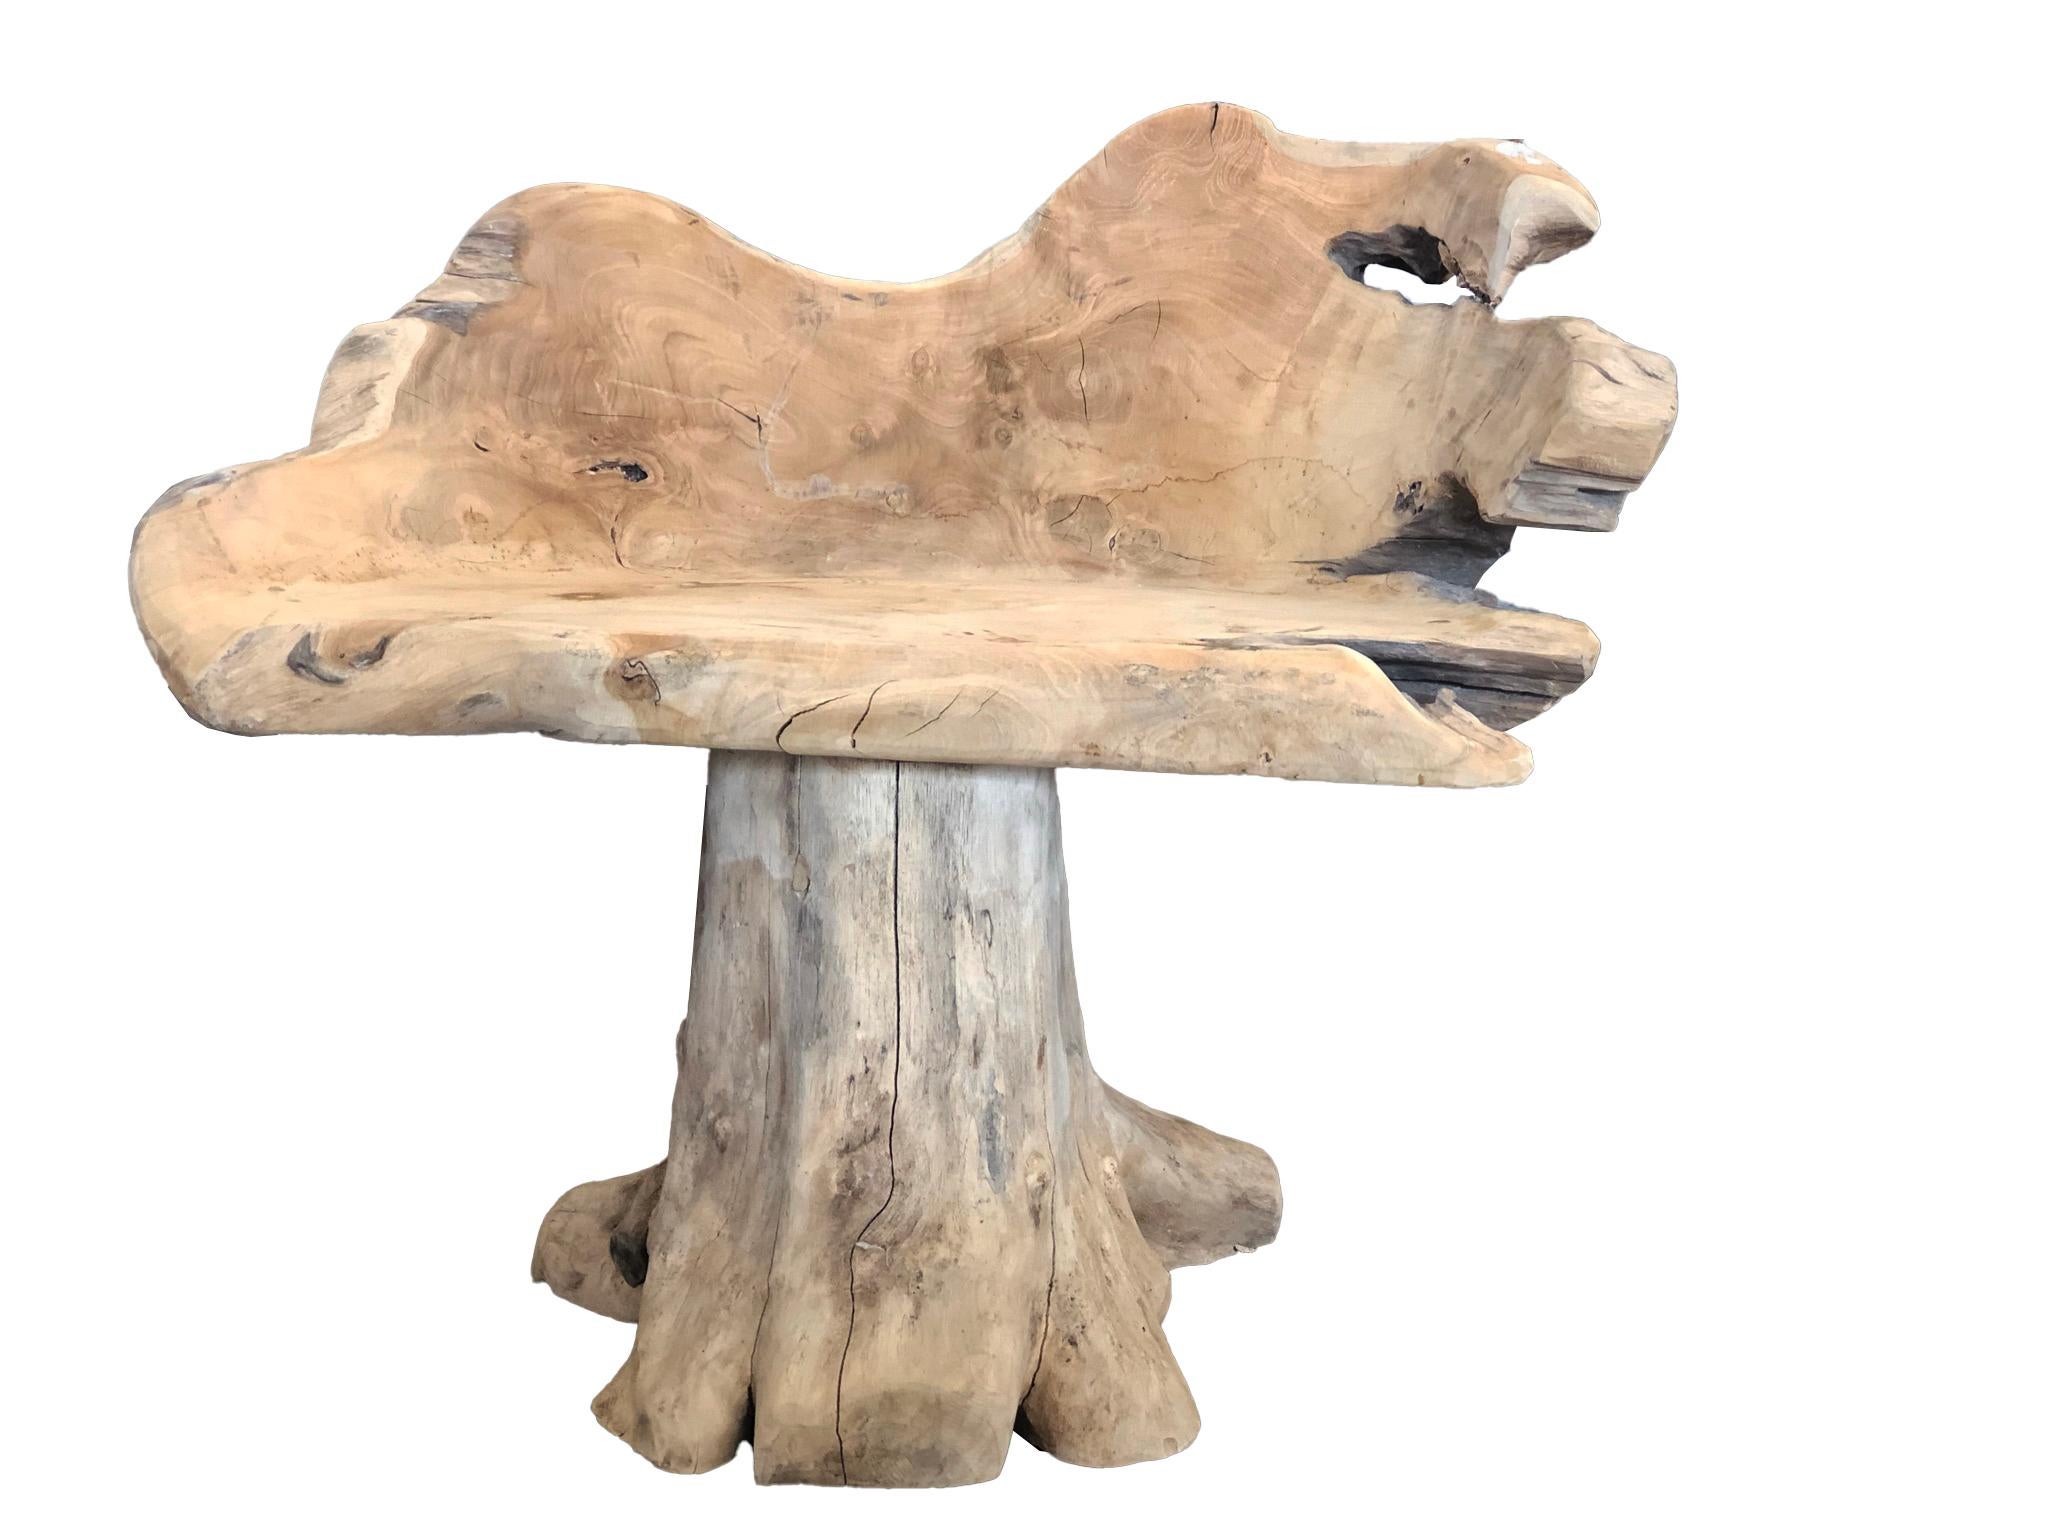 Pair of Organic natural teak root seat. Handmade in Indonesia from one single reclaimed teak root in its natural state. Natural markings like knots, lines, splits, holes and distinct grain patterns. Very sturdy and complimentary many design styles.